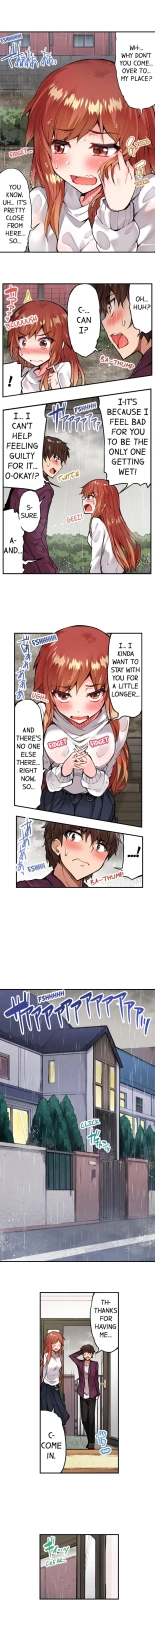 Traditional Job of Washing Girls' Body Ch. 1-192 : page 680